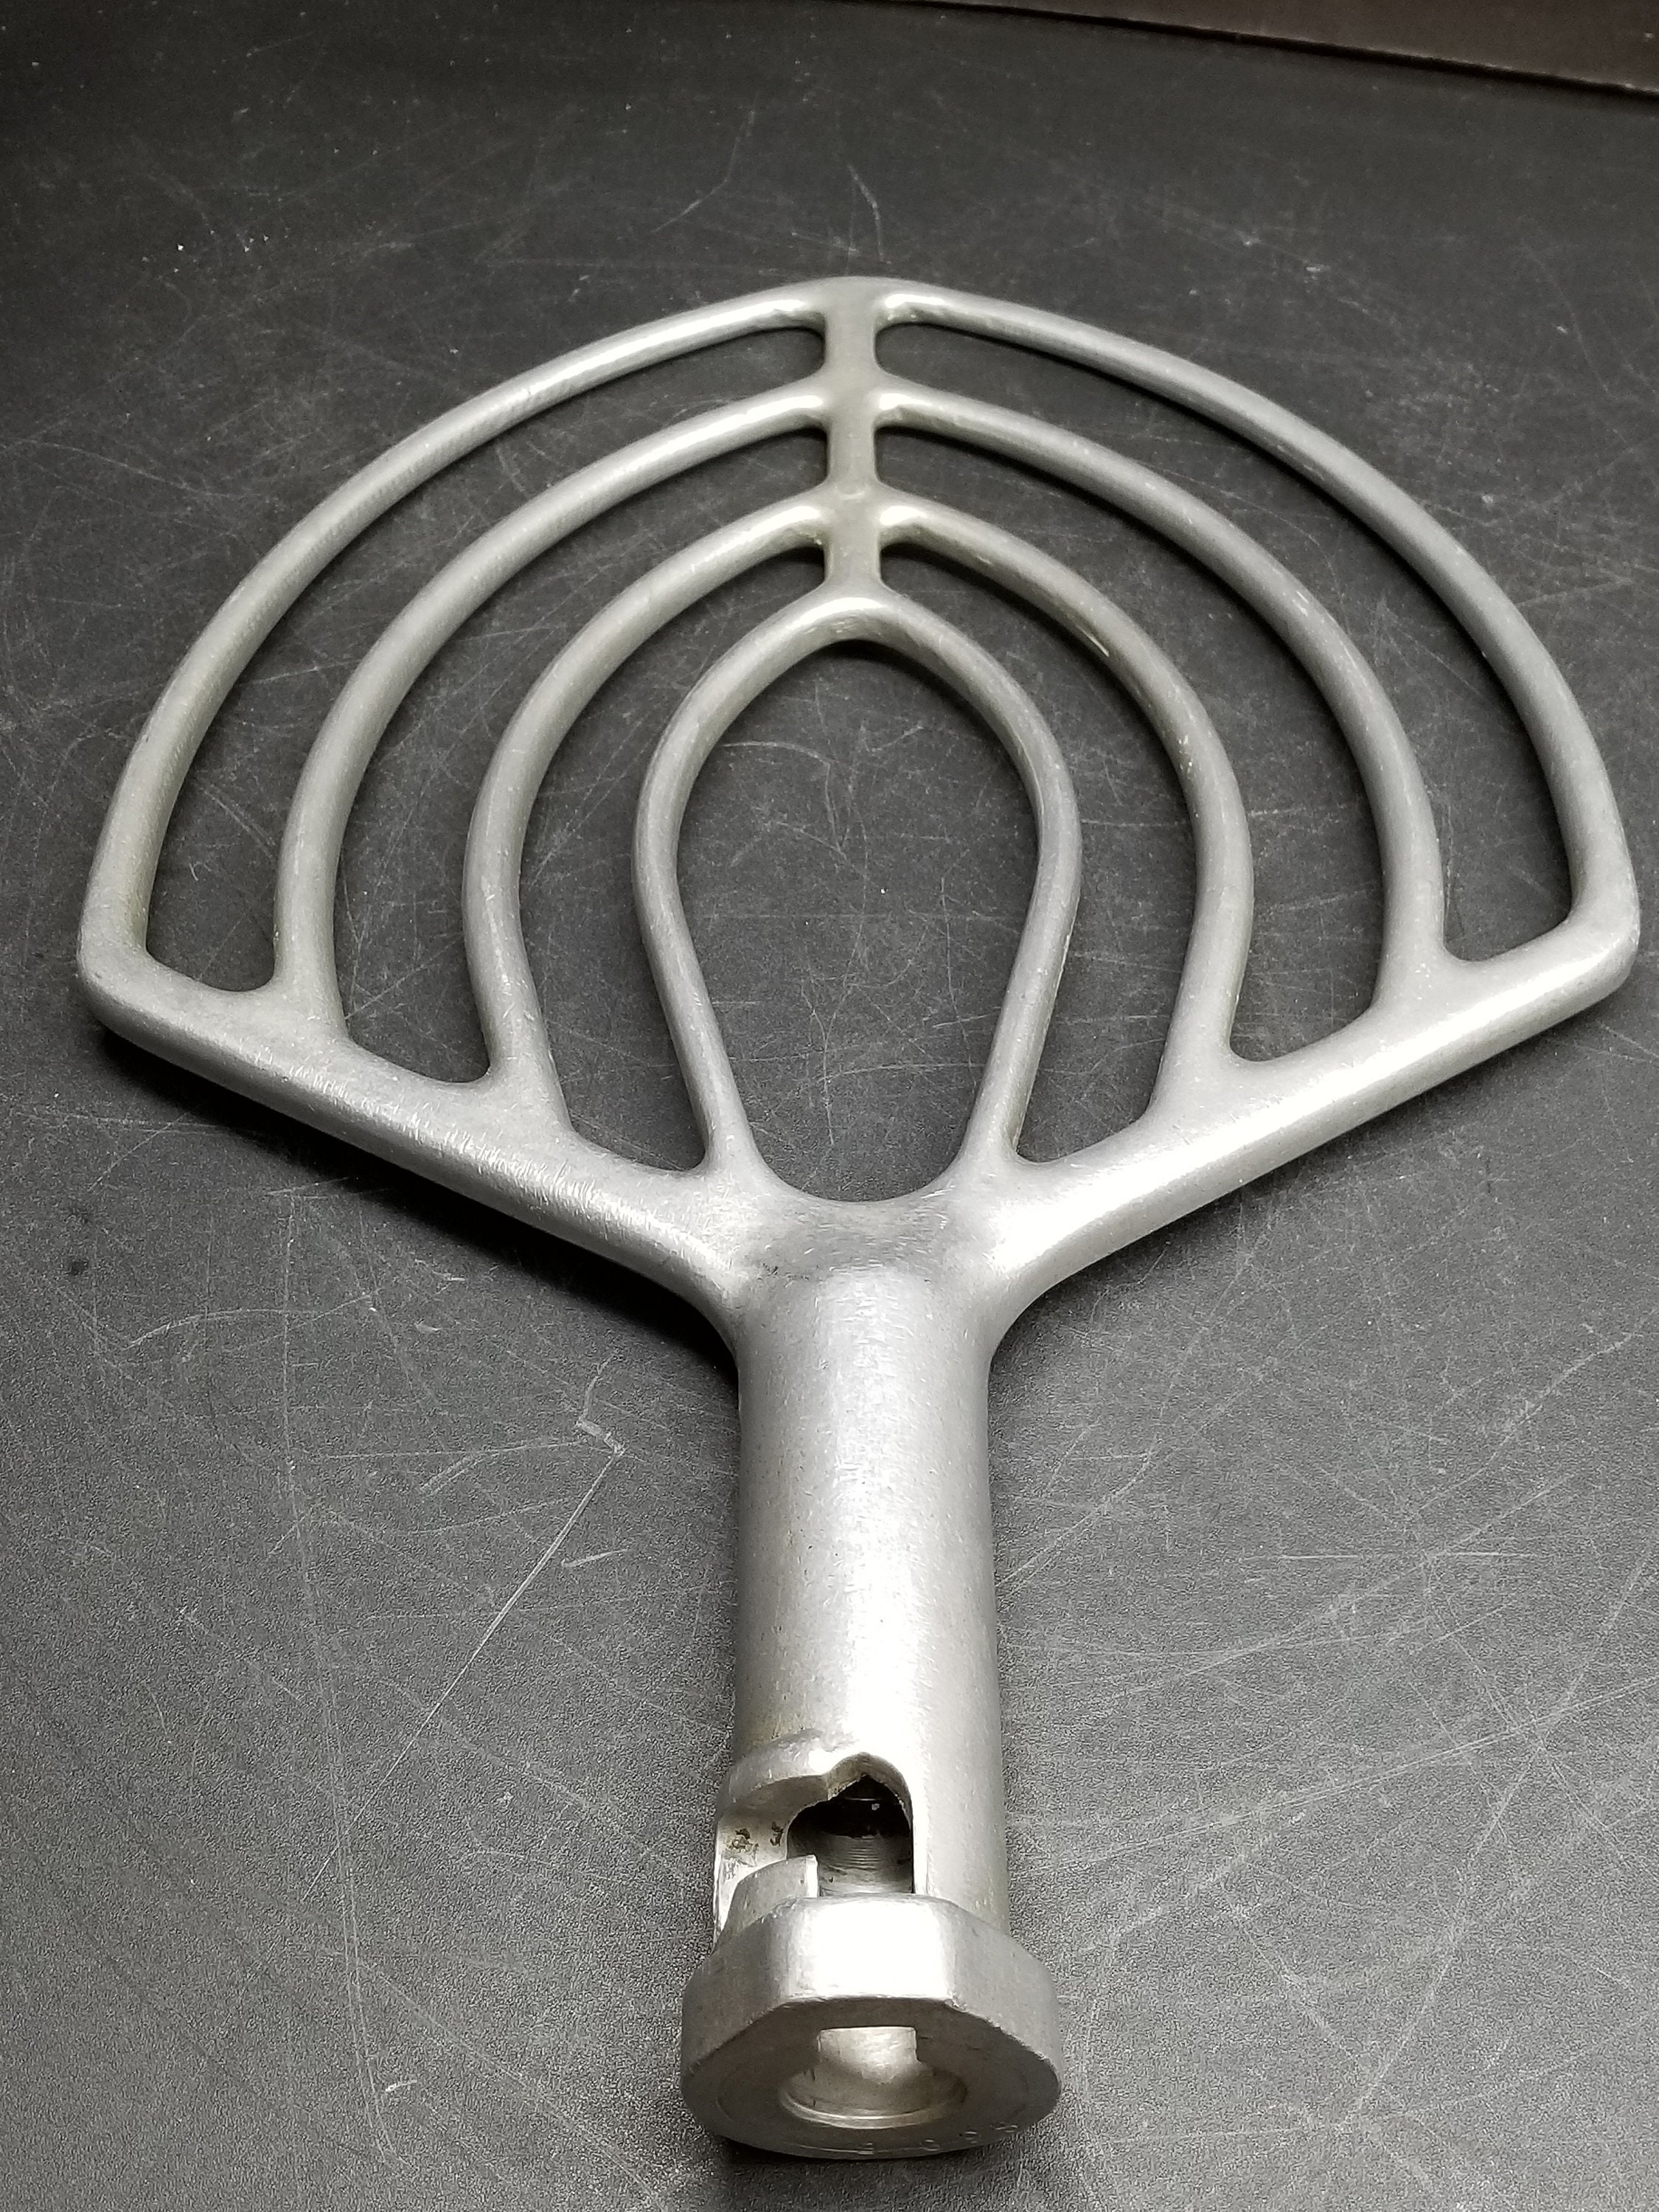 large vintage heavy duty commercial industrial mixer beater paddle